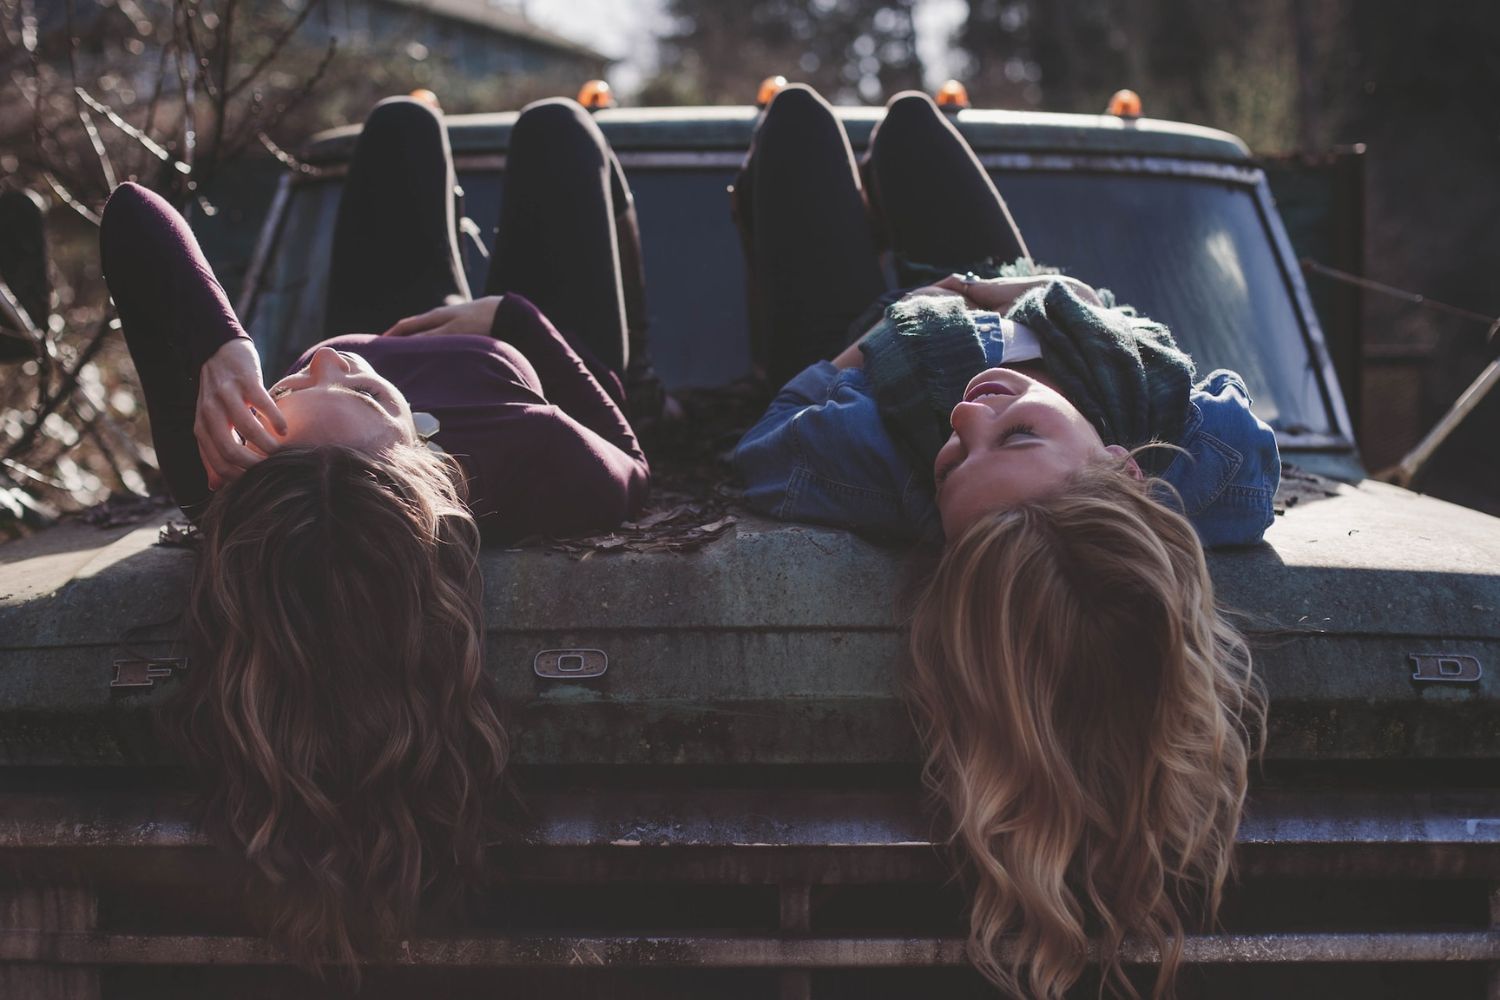 20+ Best Friend Picture Ideas to Celebrate Your Friendship